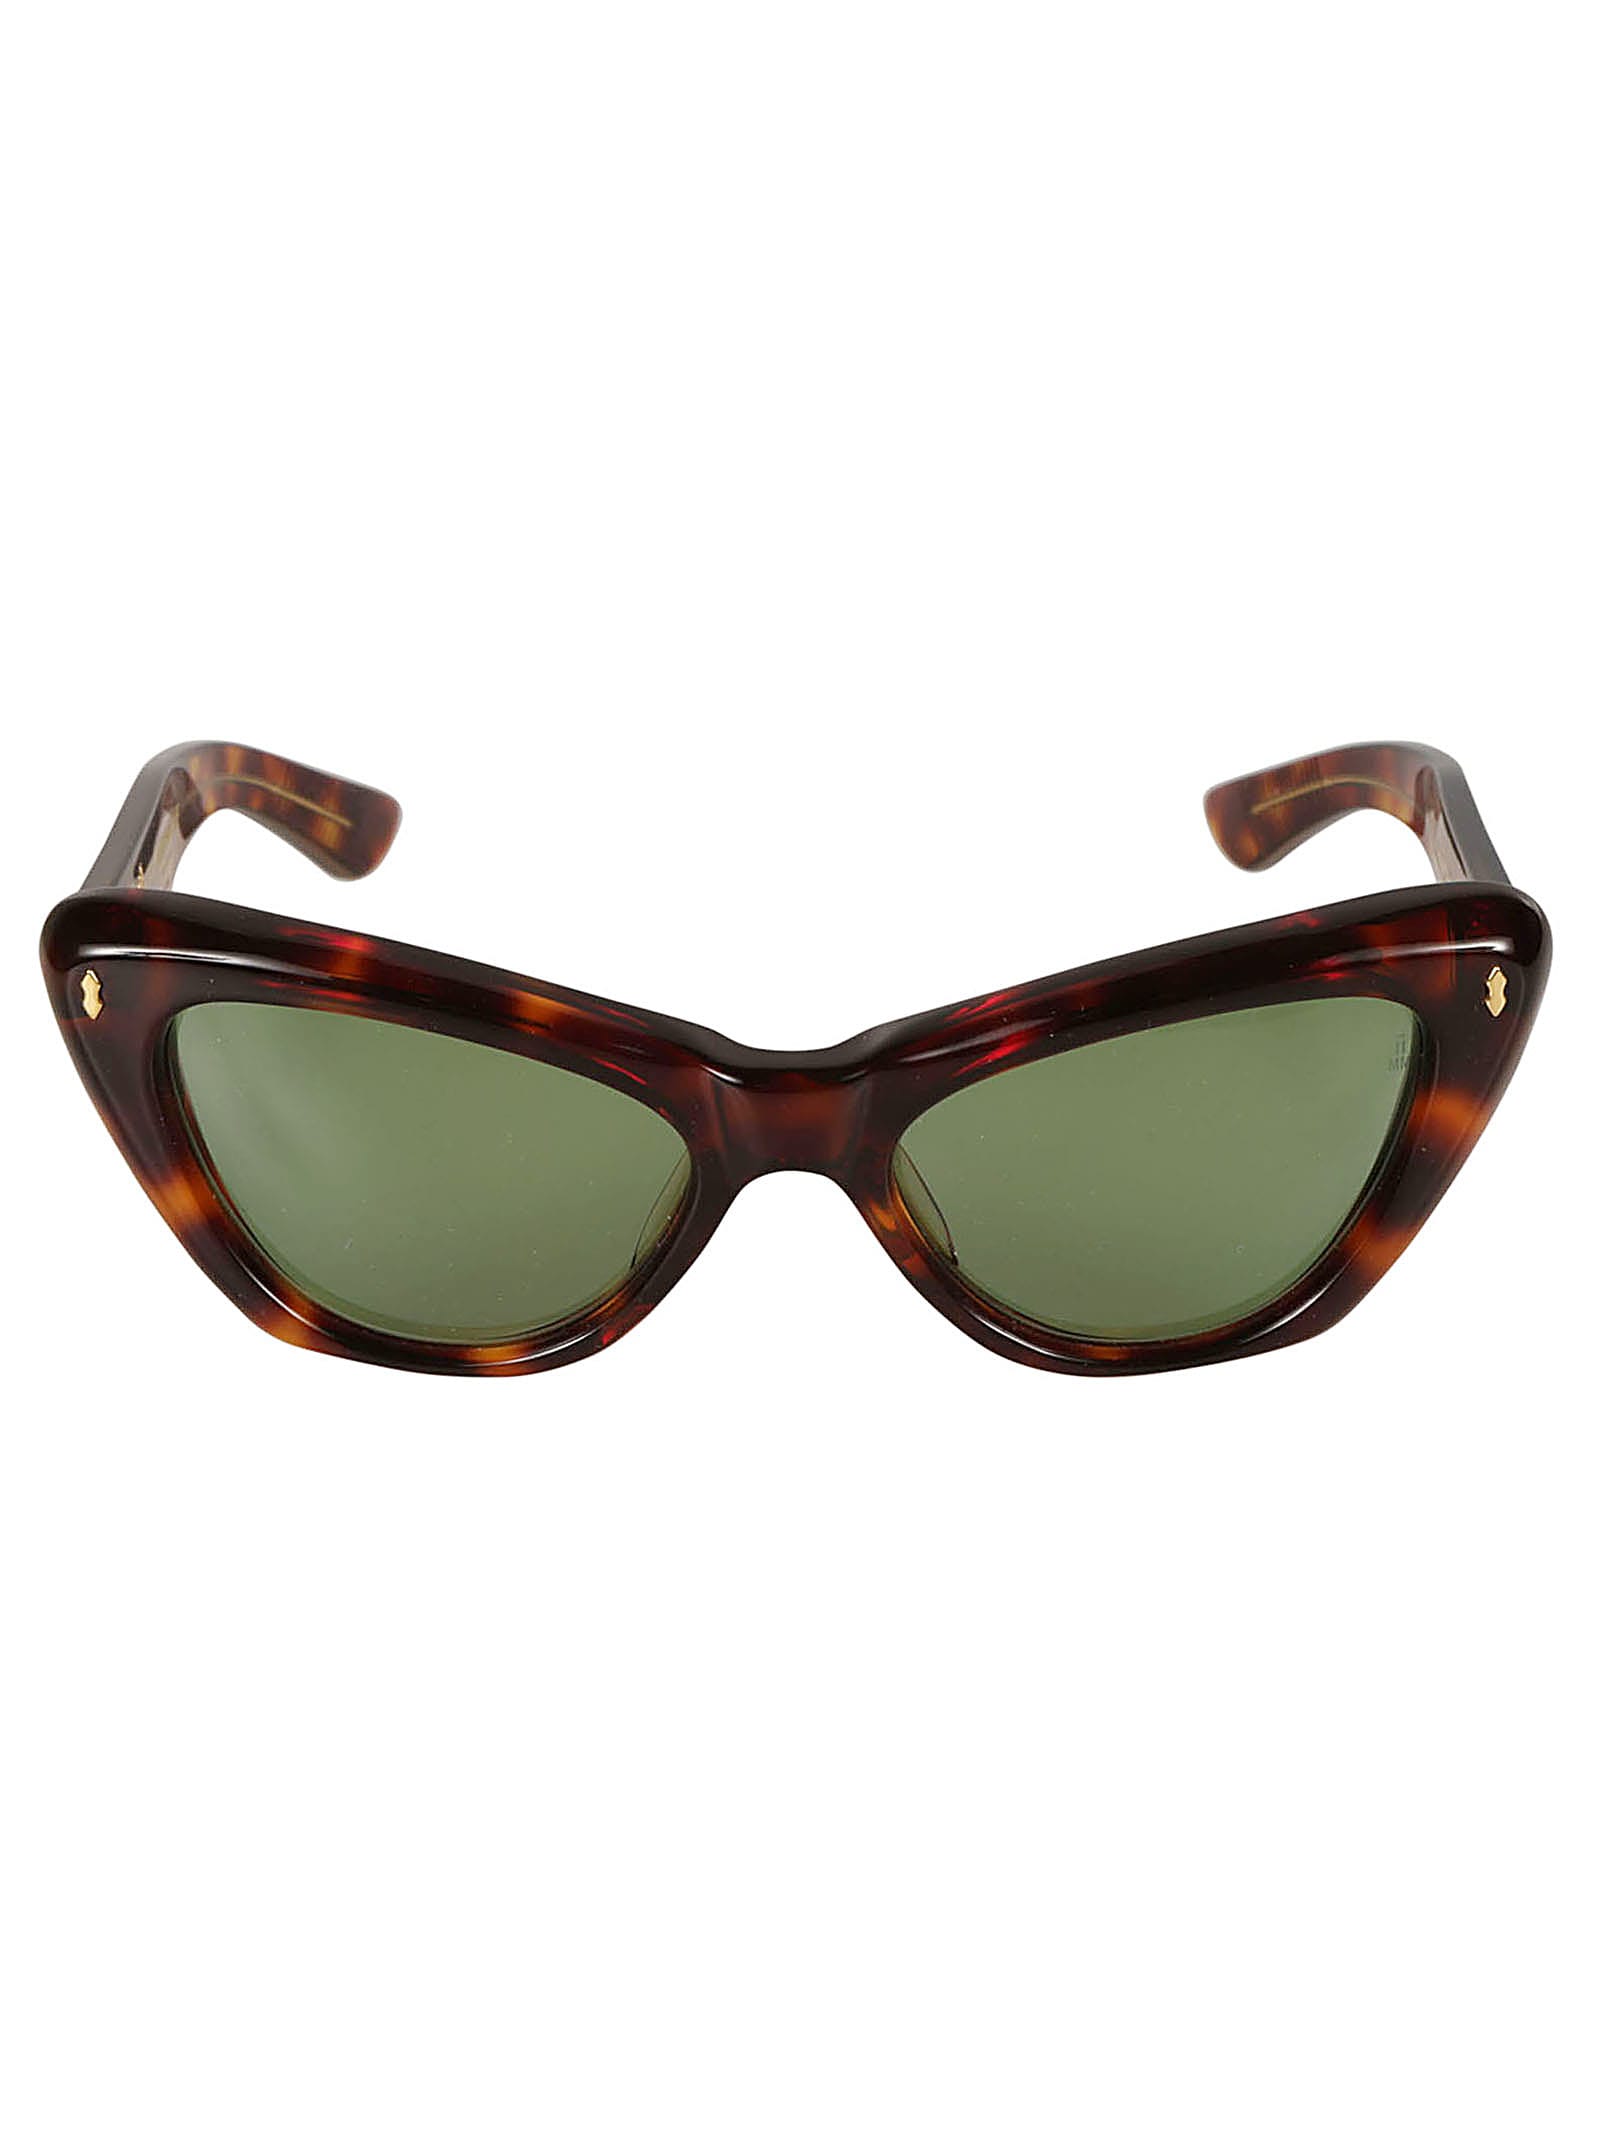 Jacques Marie Mage Kelly Sunglasses Sunglasses In Havana